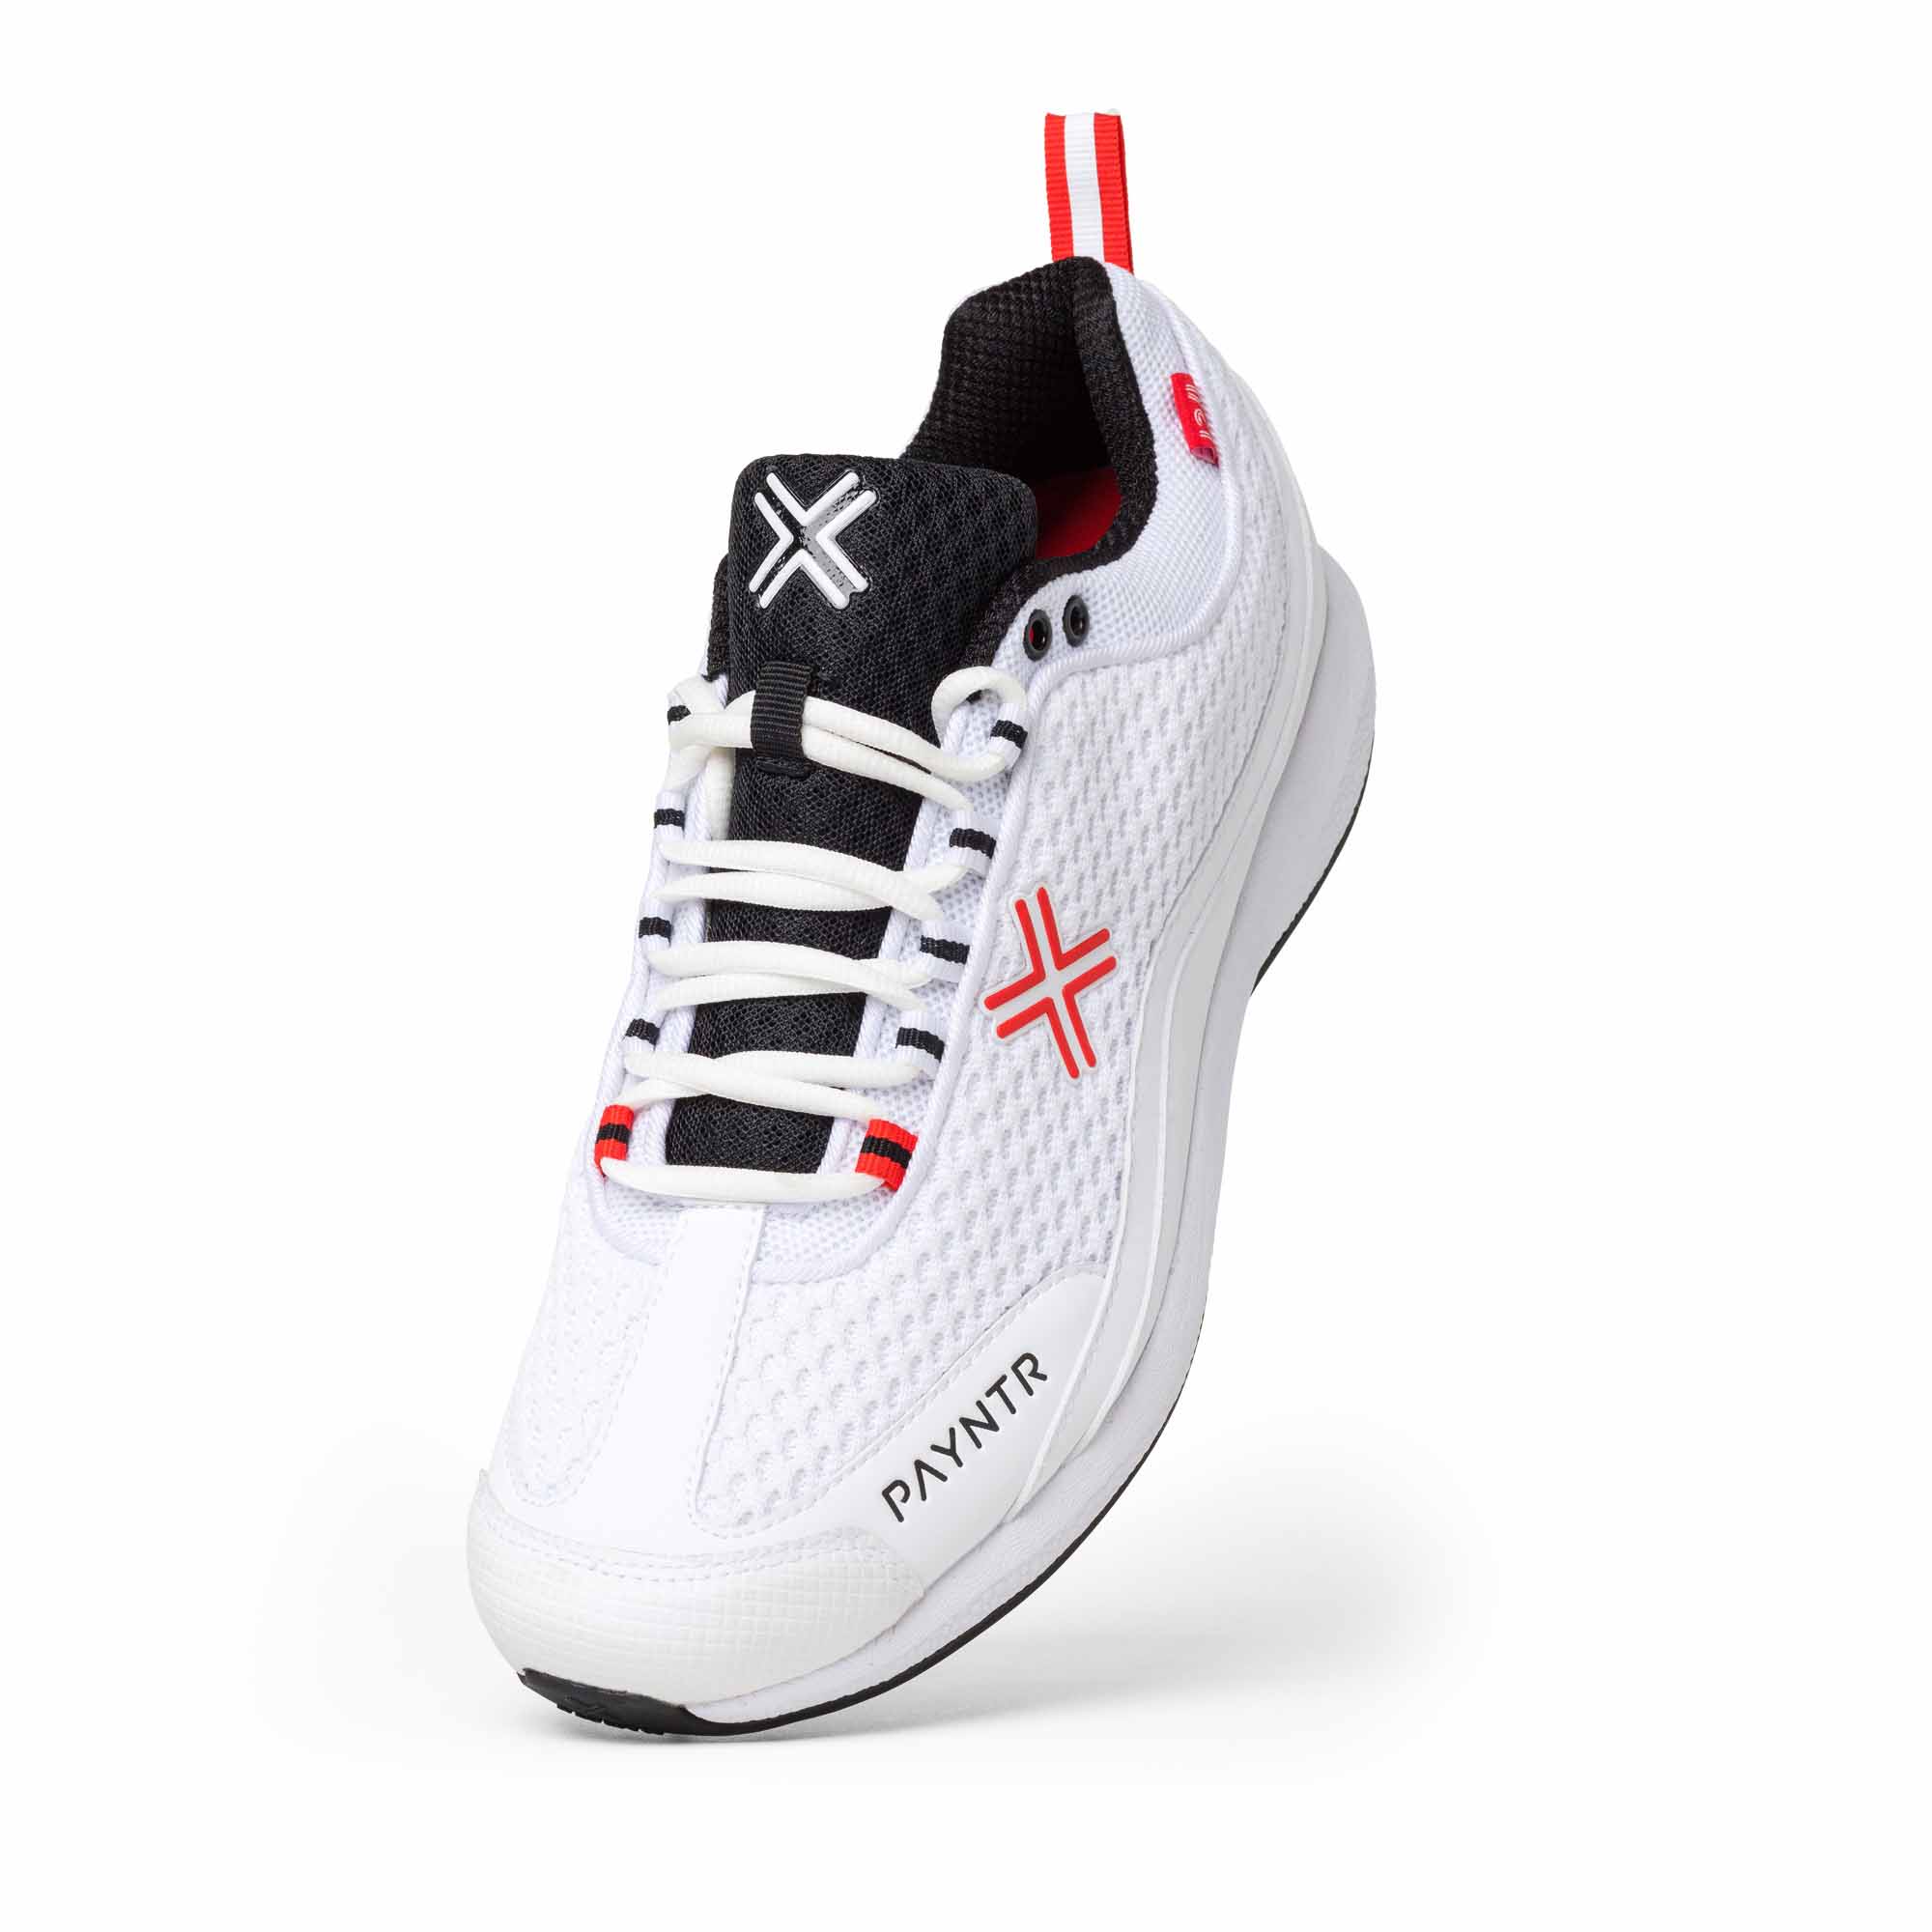 PAYNTR BODY-LINE 124 Cricket Spike Shoes